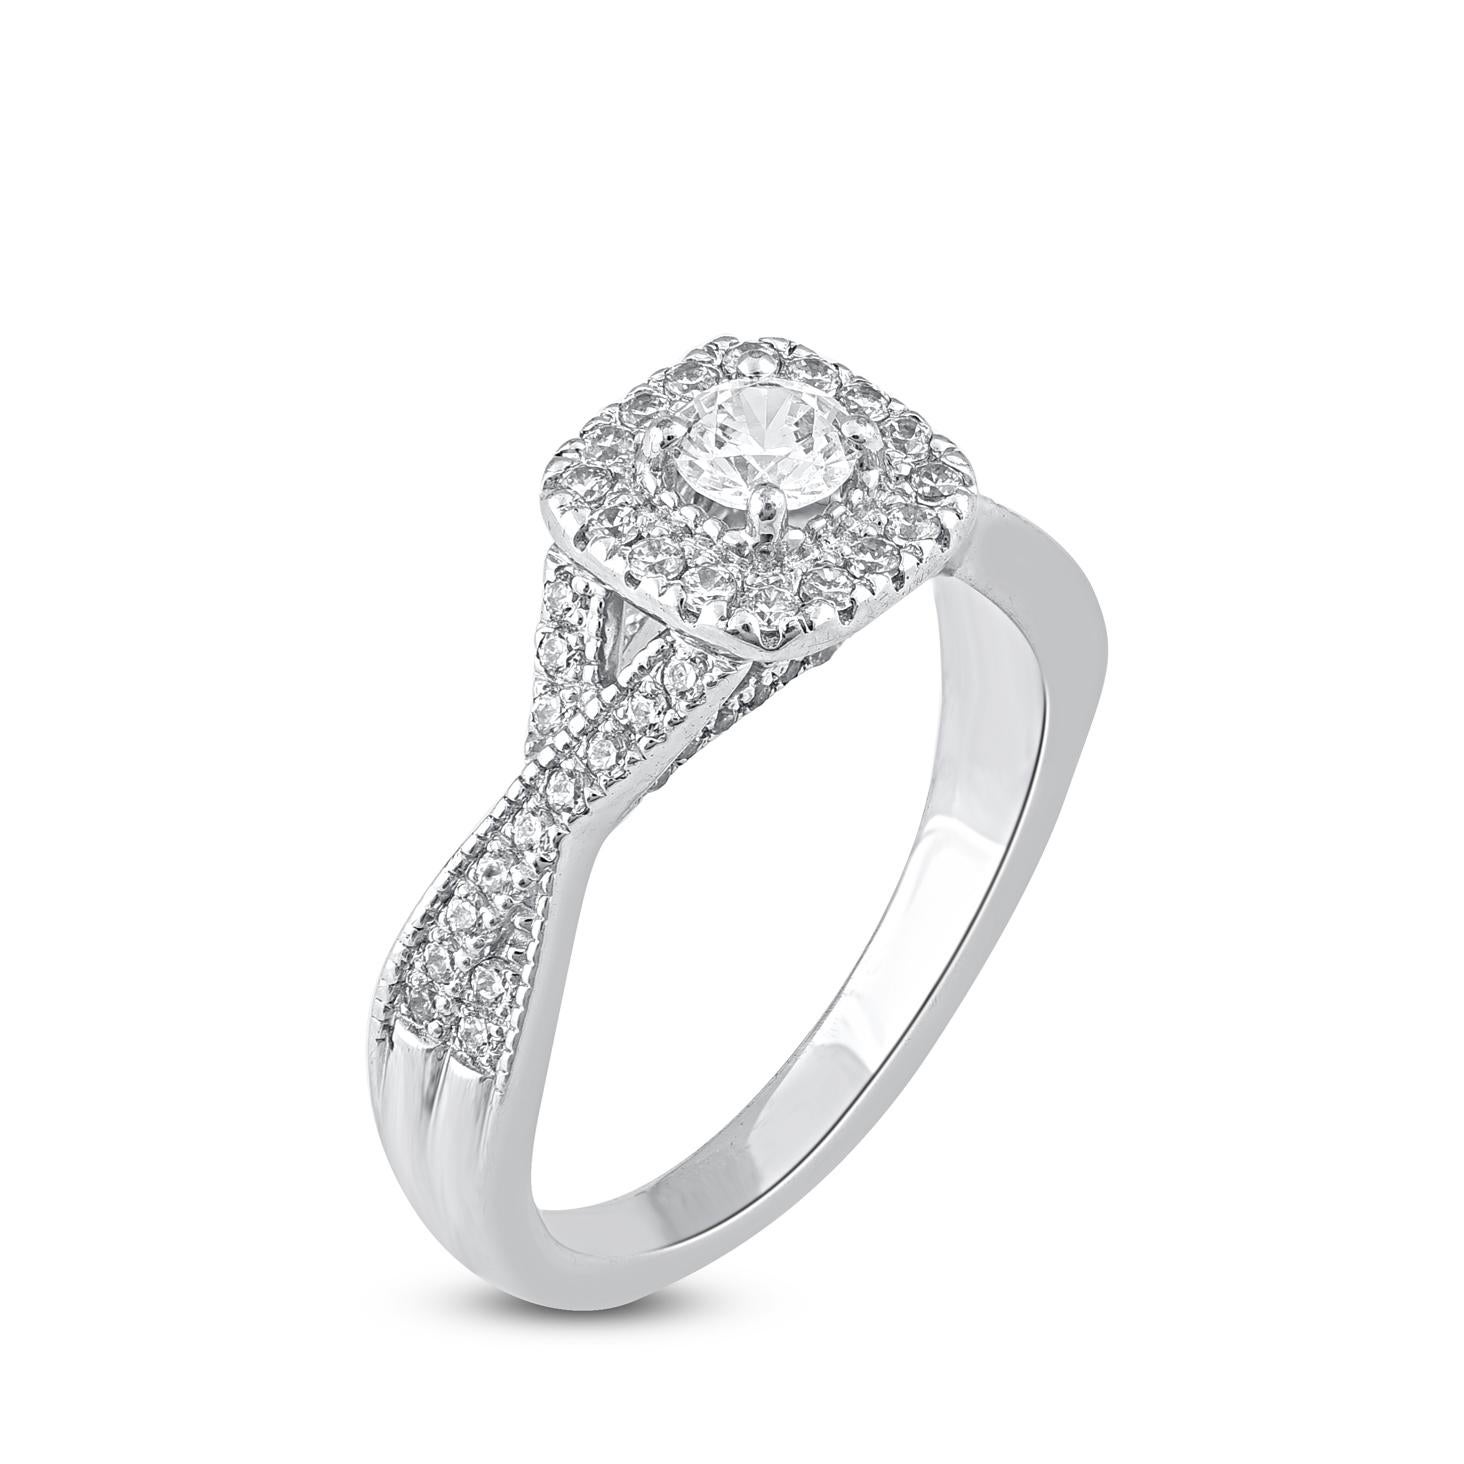 Bring charm to your look with this diamond engagement halo ring. This ring is beautifully crafted in 14 Karat white gold and studded with 77 single cut round and brilliant cut diamonds in prong and bezel setting. Total diamond weight is 0.75 carat.